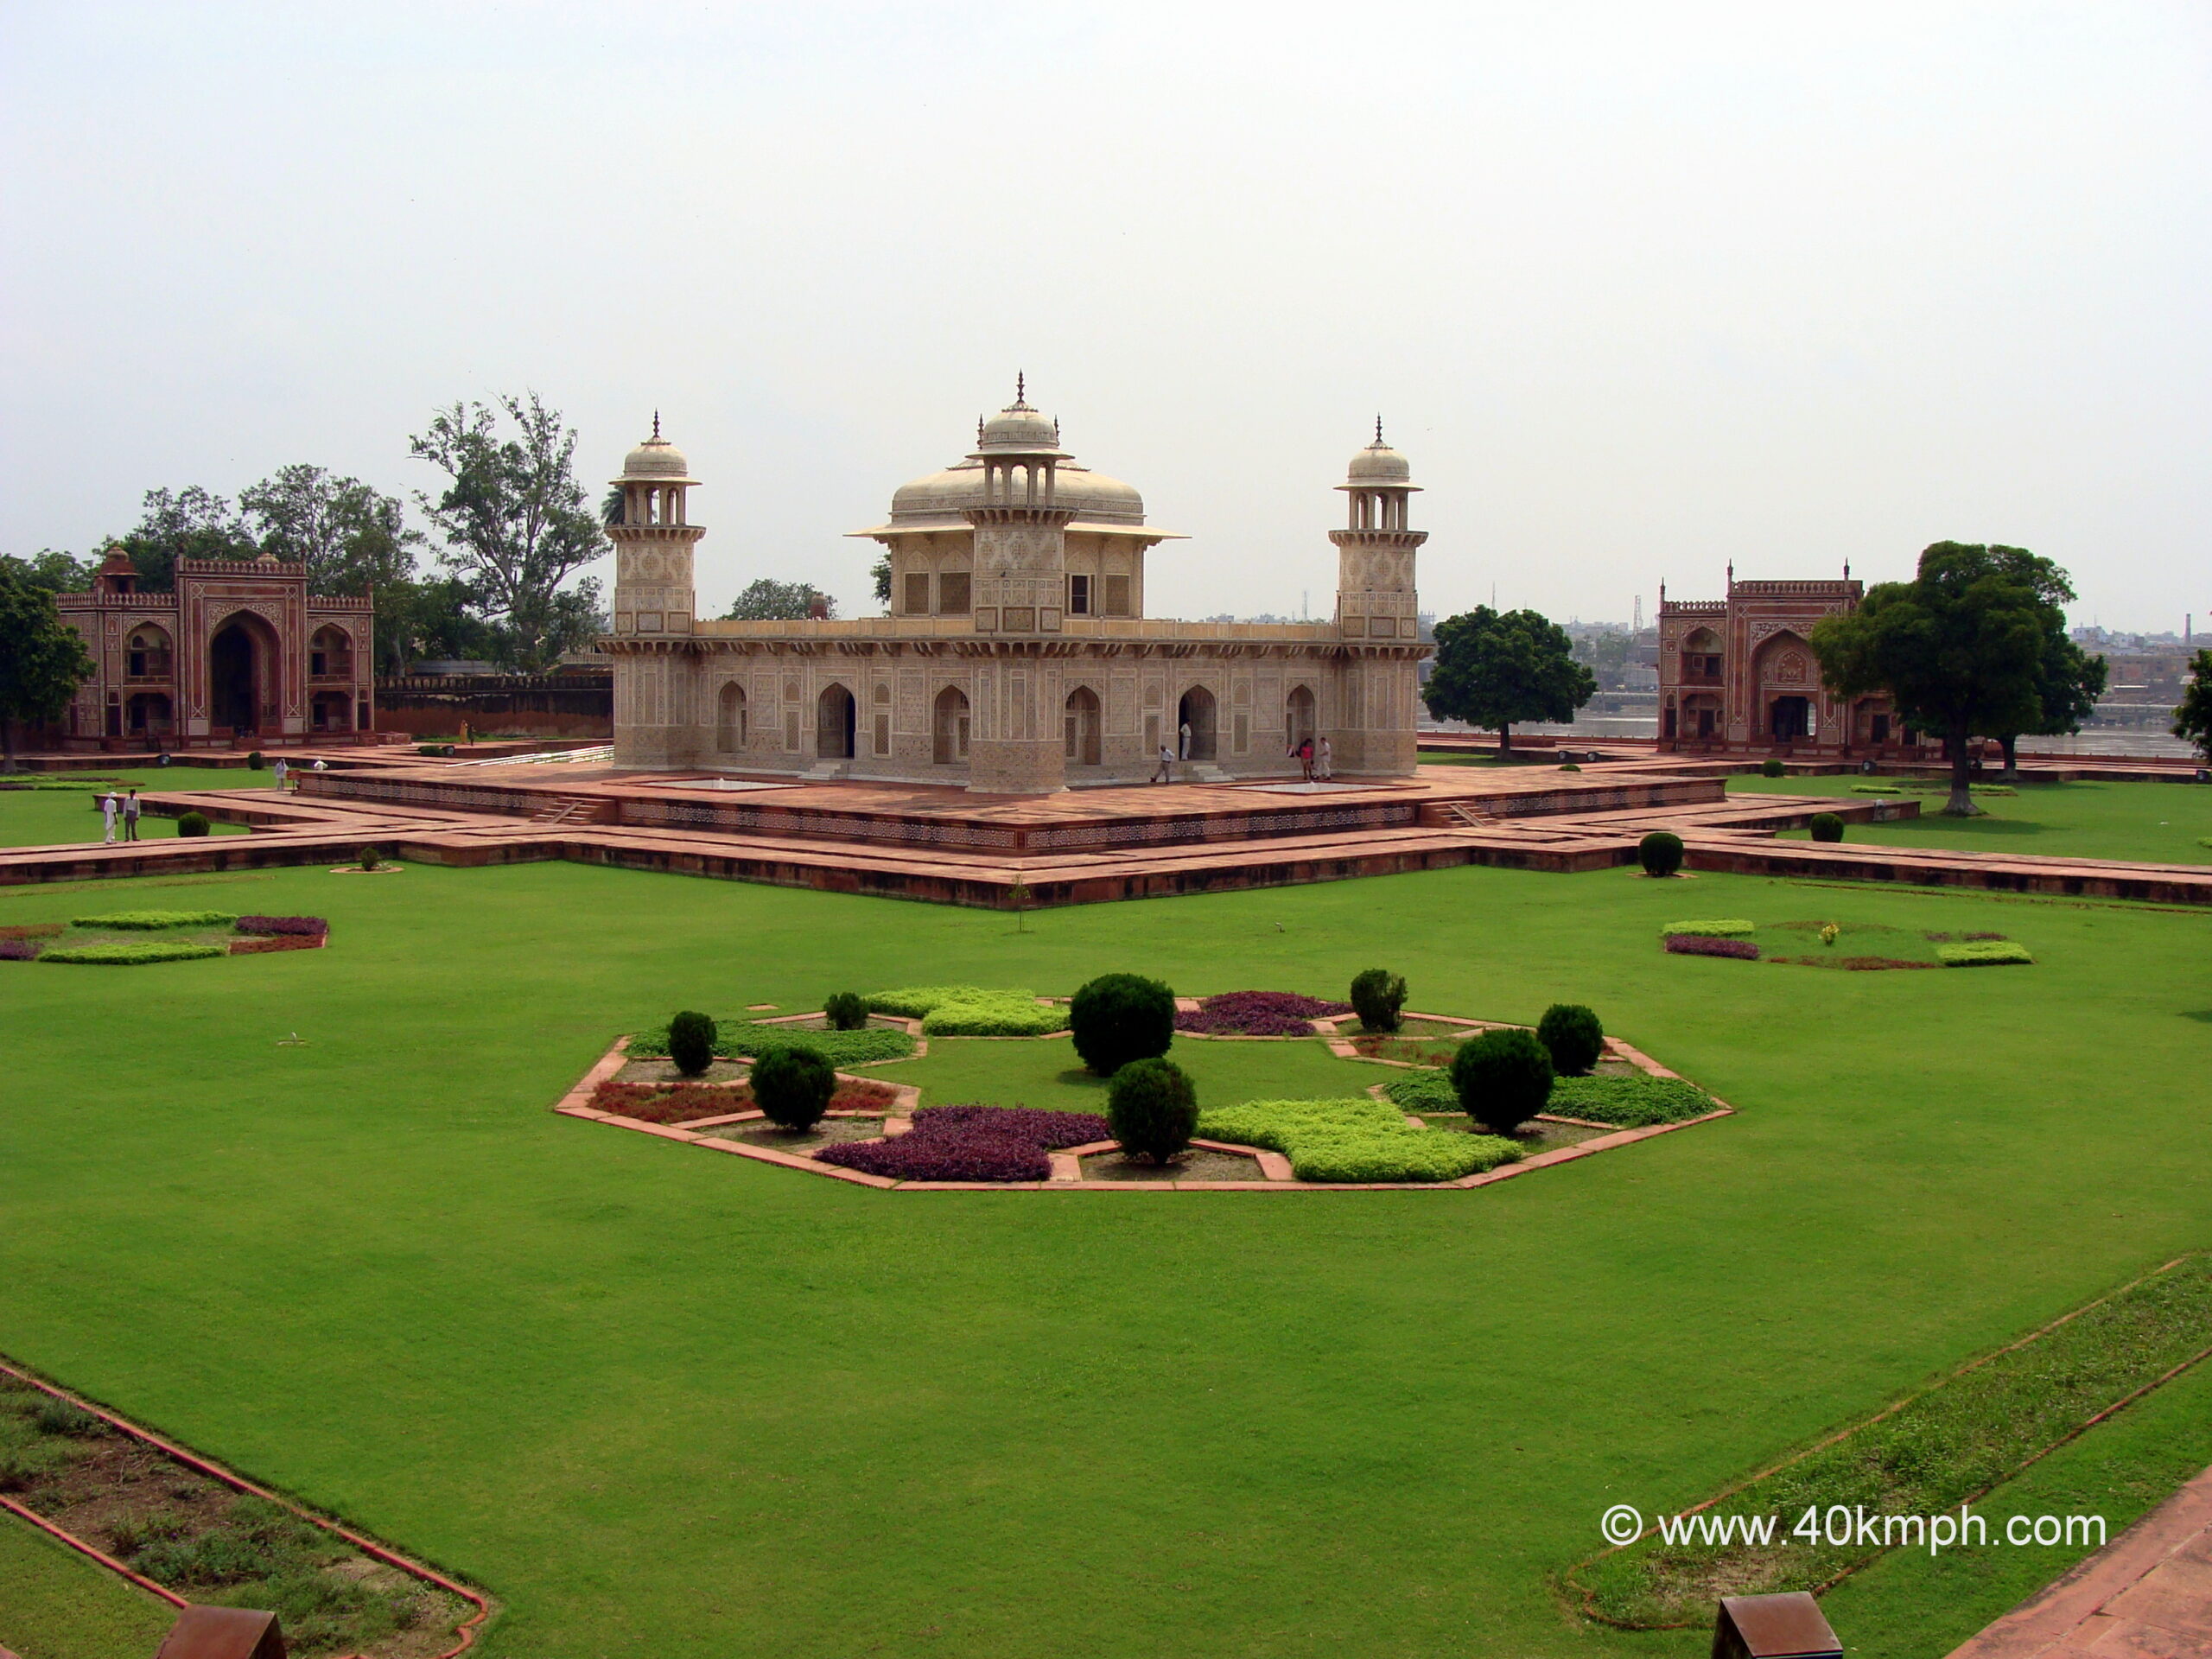 Itimad-ud-Daula’s Tomb – Built in 1622-28 A.D.